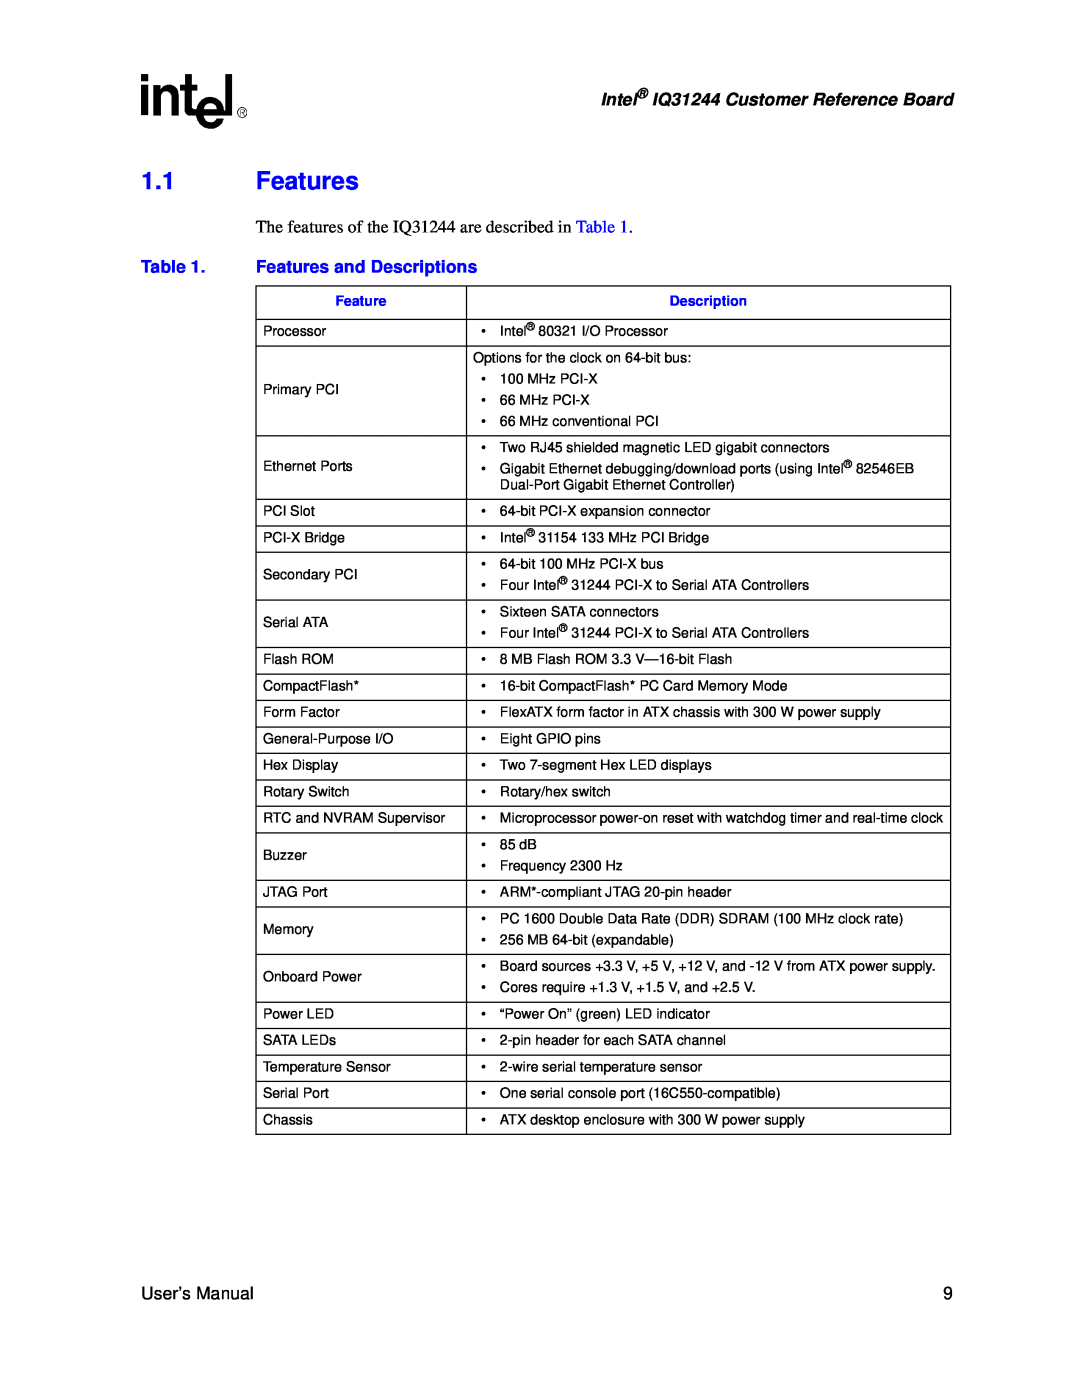 Intel user manual 1.1Features, Features and Descriptions, Intel IQ31244 Customer Reference Board 